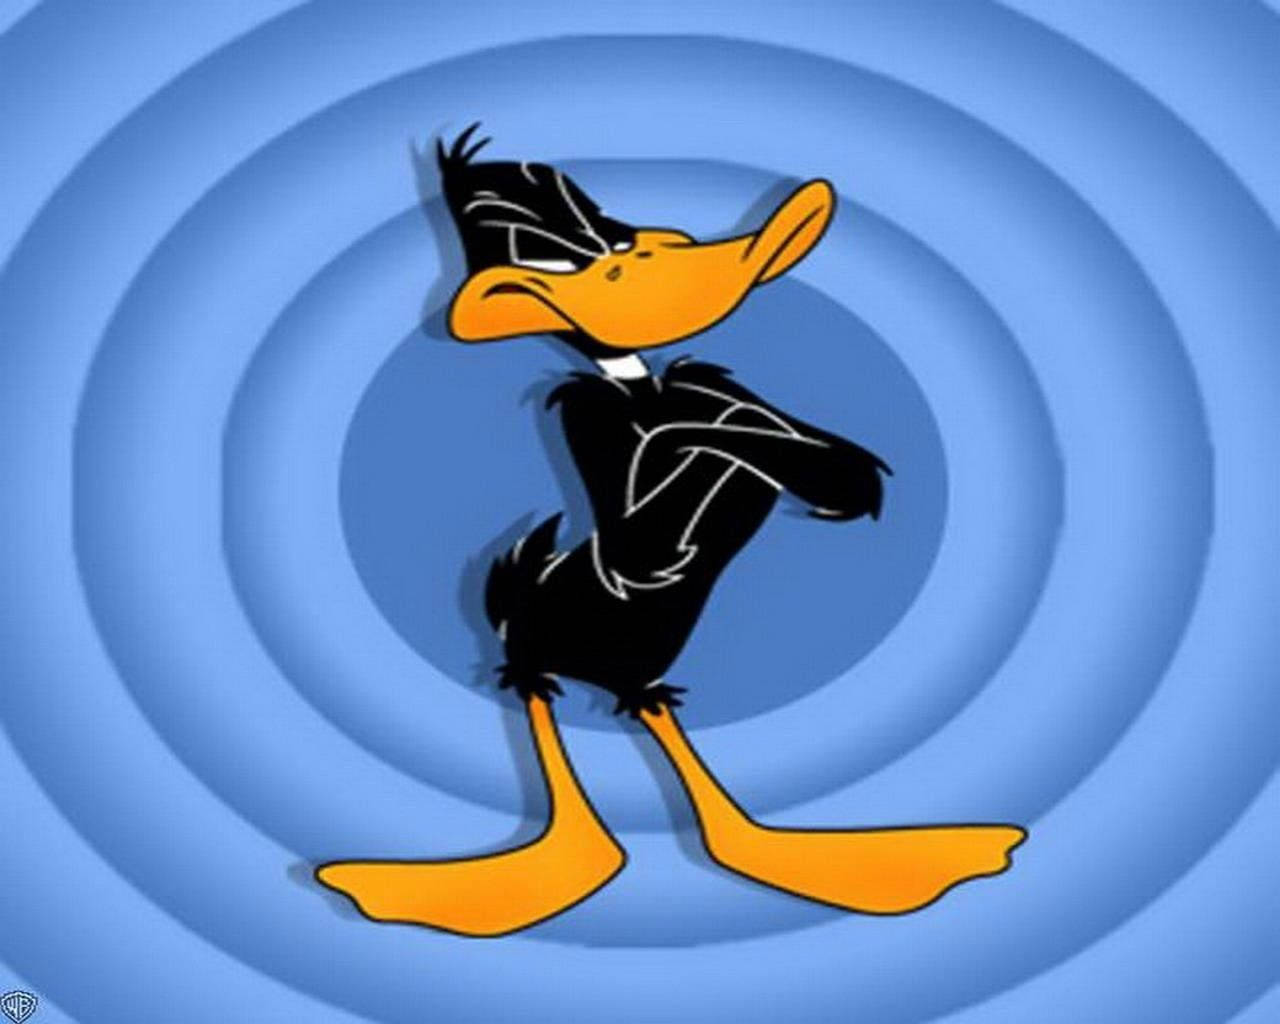 Sinister Look Of Daffy Duck Background